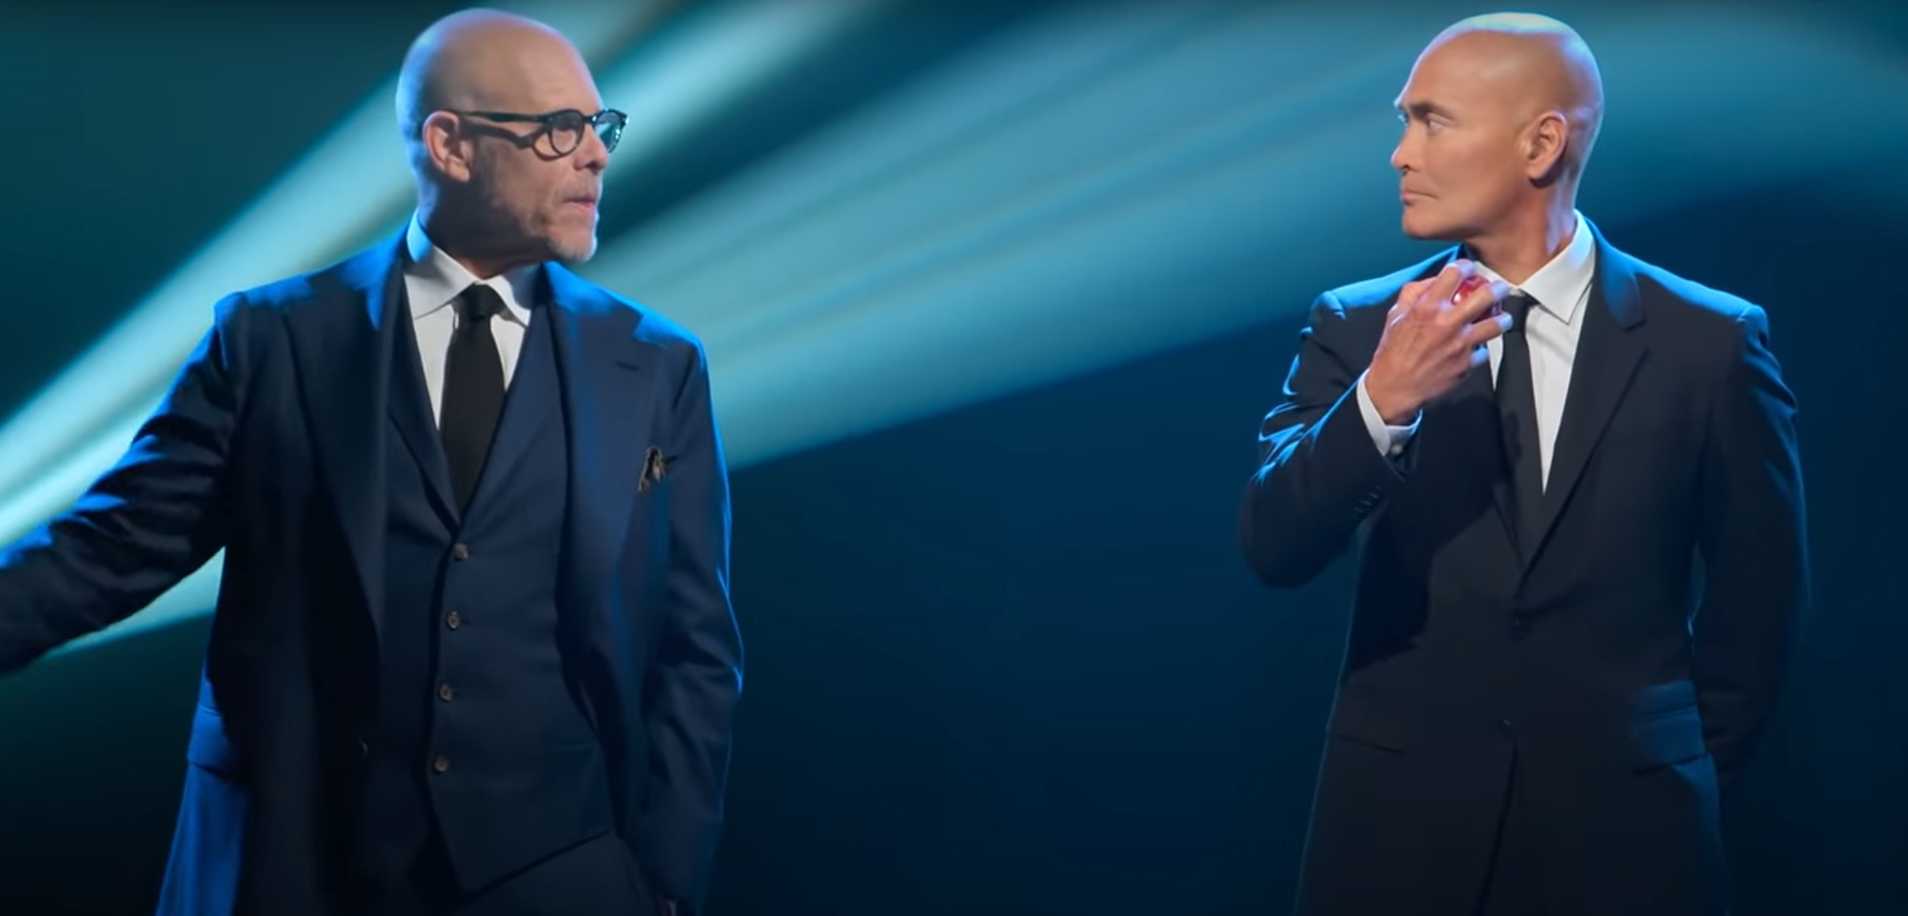 Iron Chef: Quest for an Iron Legend’s hosts Mark Dasascos and Alton Brown for Netflix